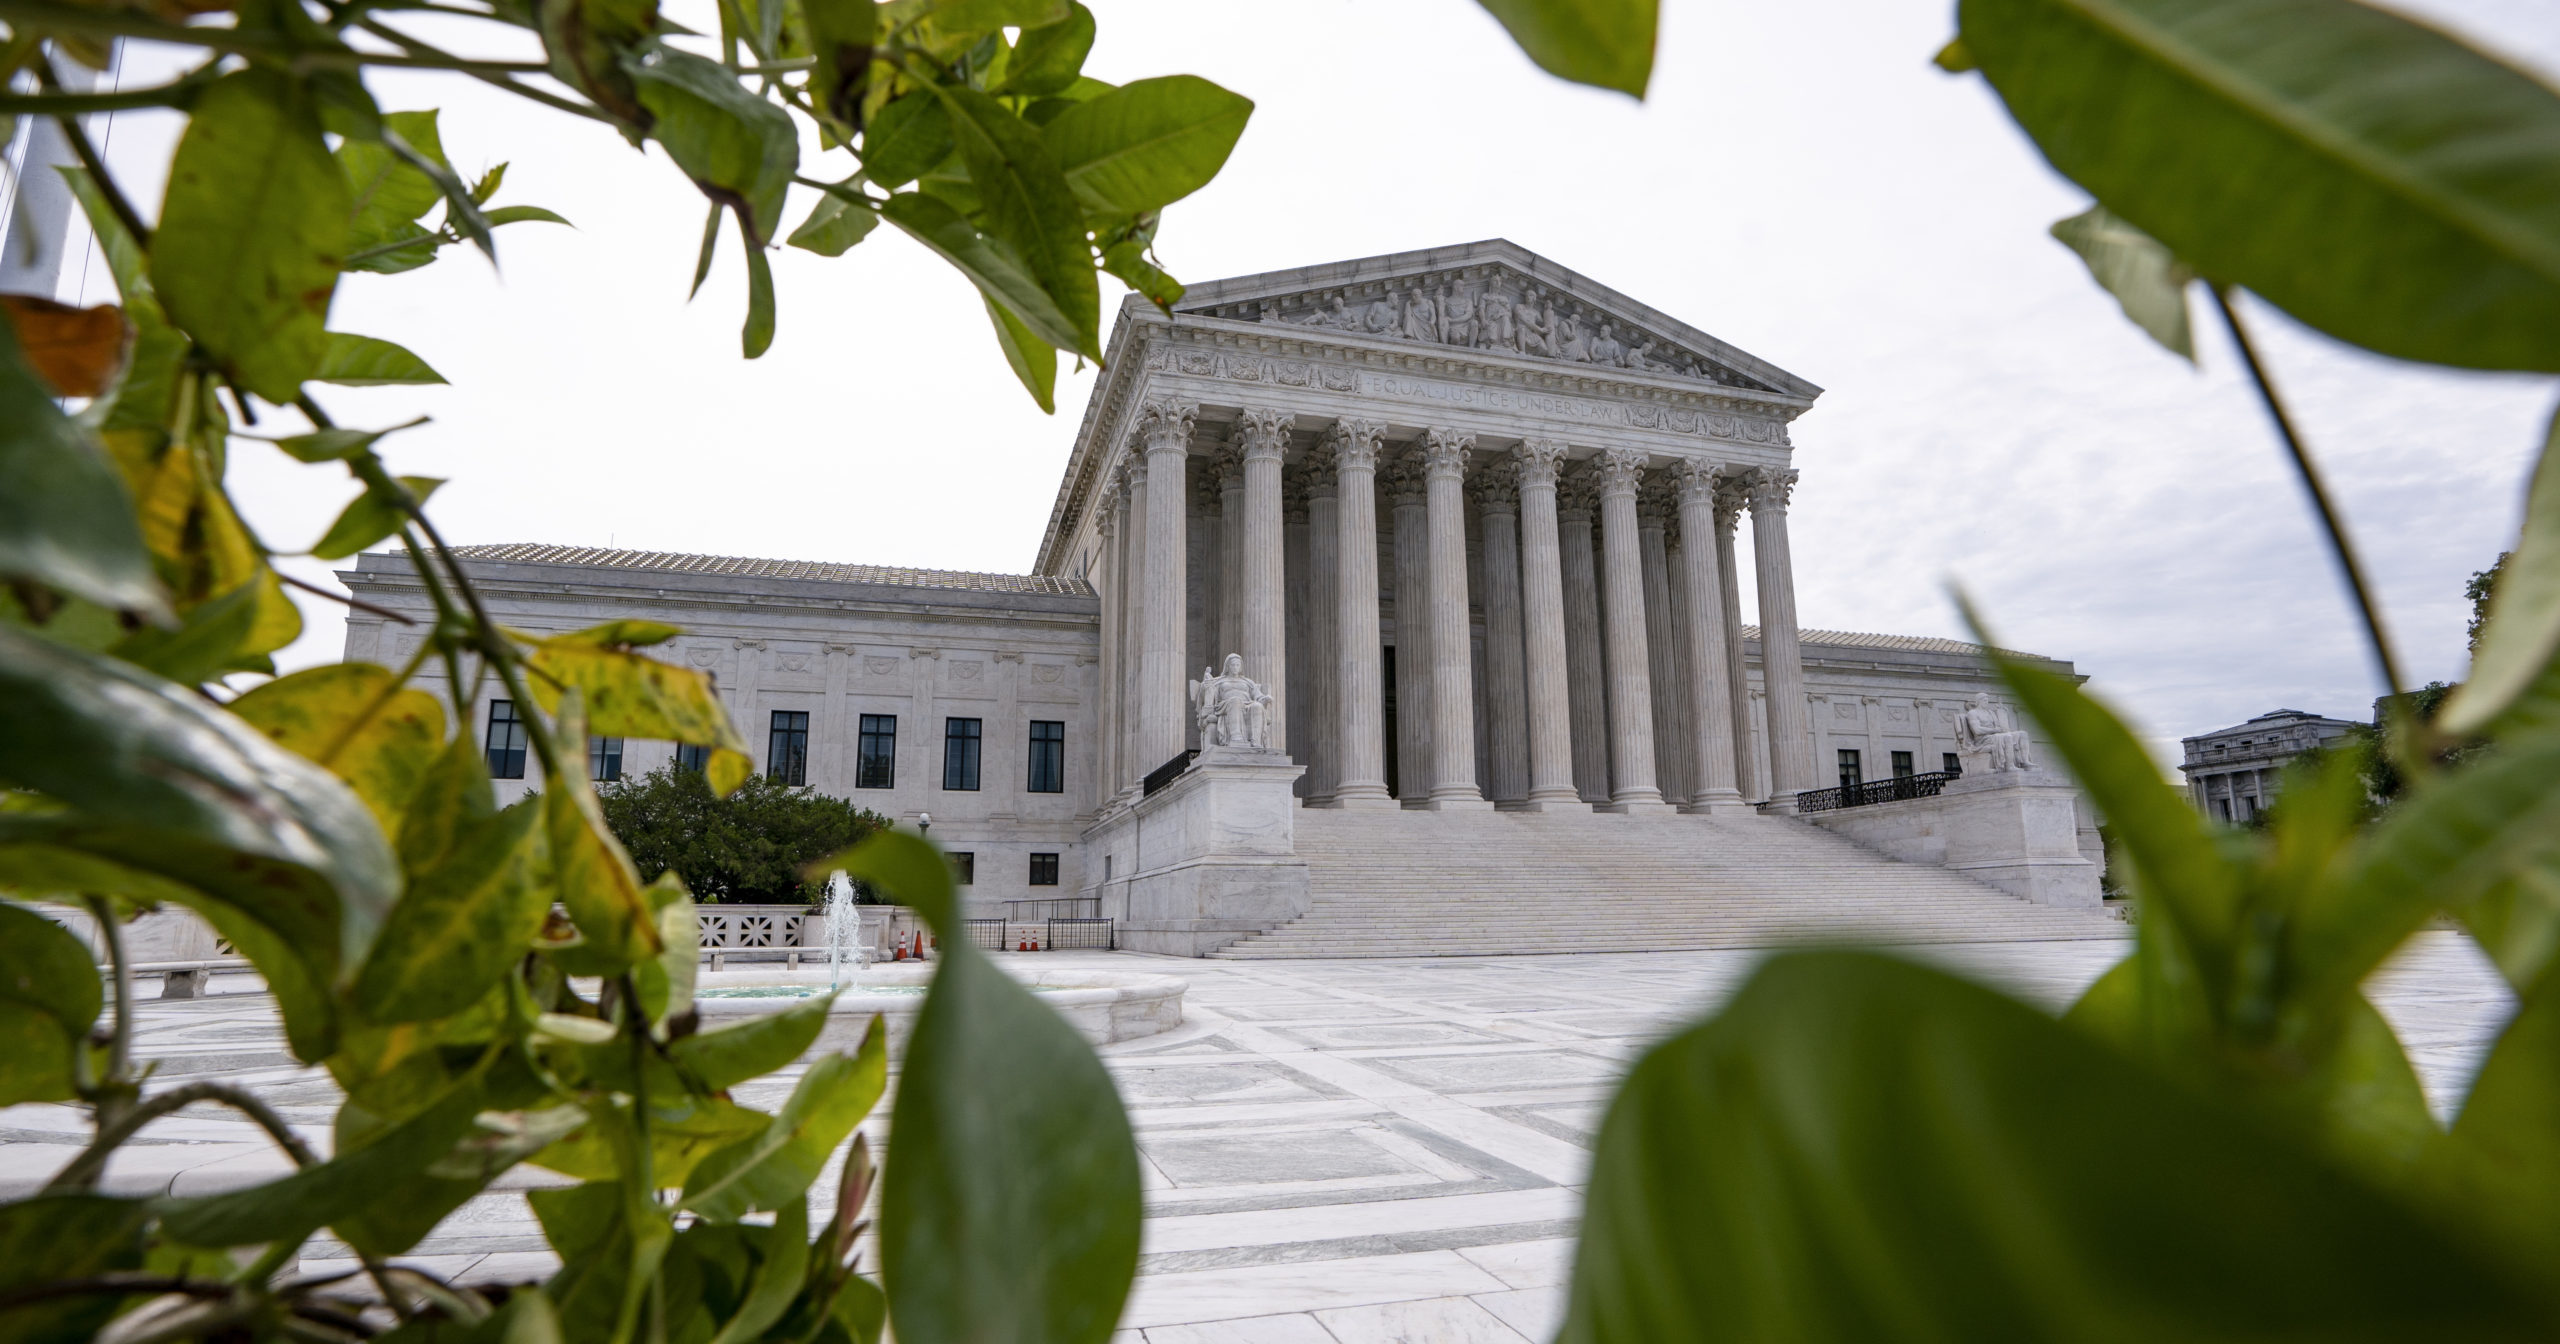 The Supreme Court is seen in Washington on June 15, 2020.